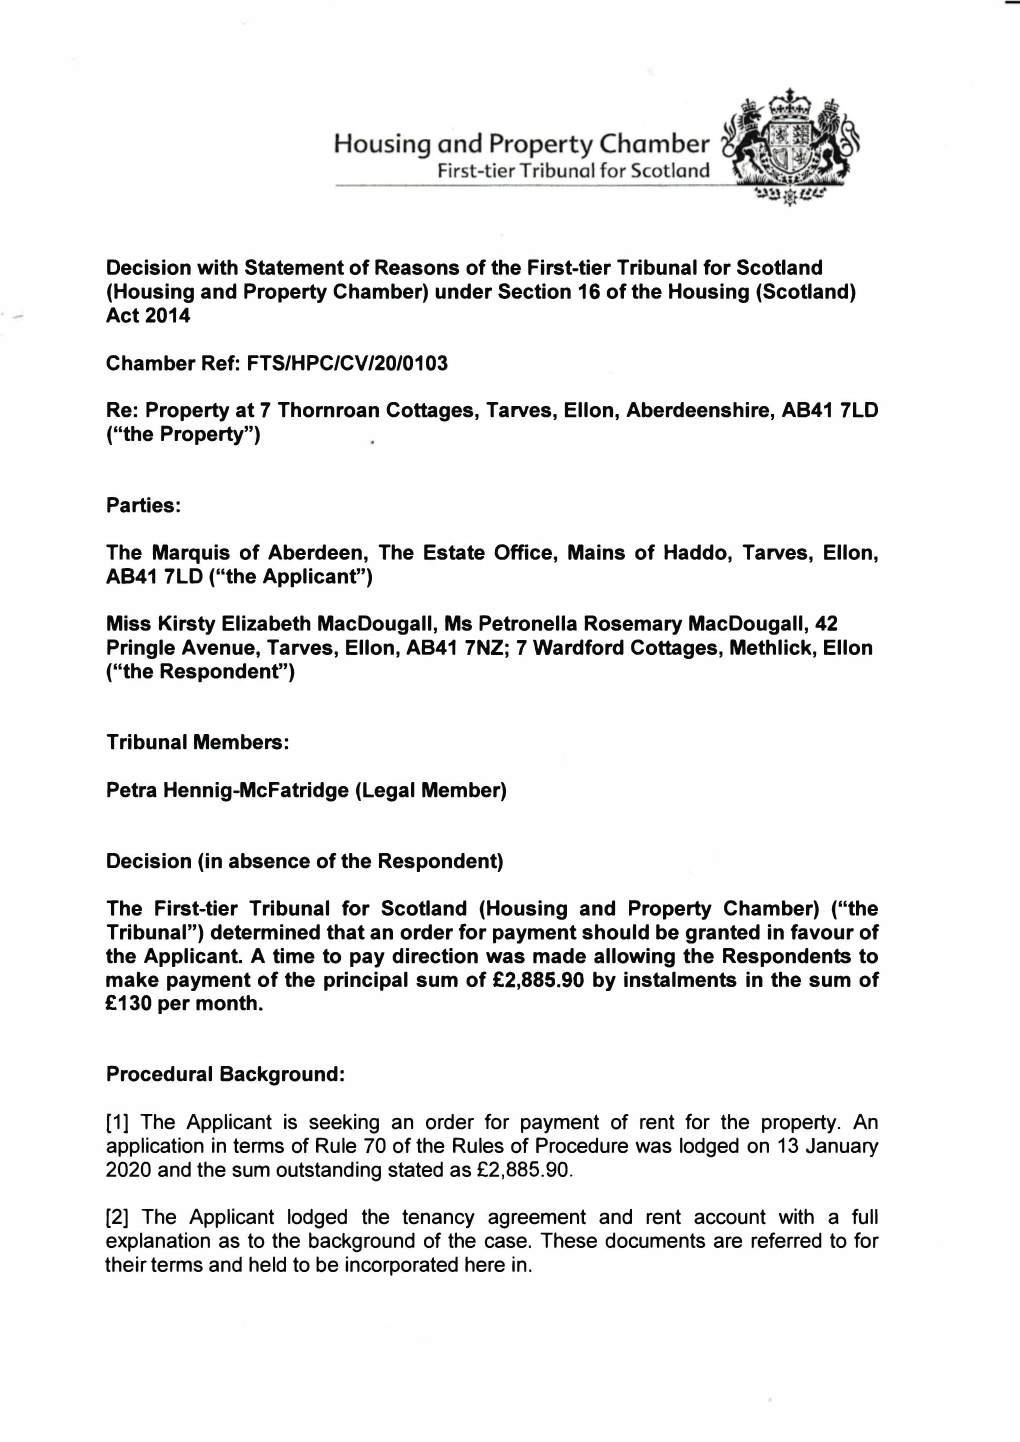 Decision with Statement of Reasons of the First-Tier Tribunal for Scotland (Housing and Property Chamber) Under Section 16 of the Housing (Scotland) Act 2014